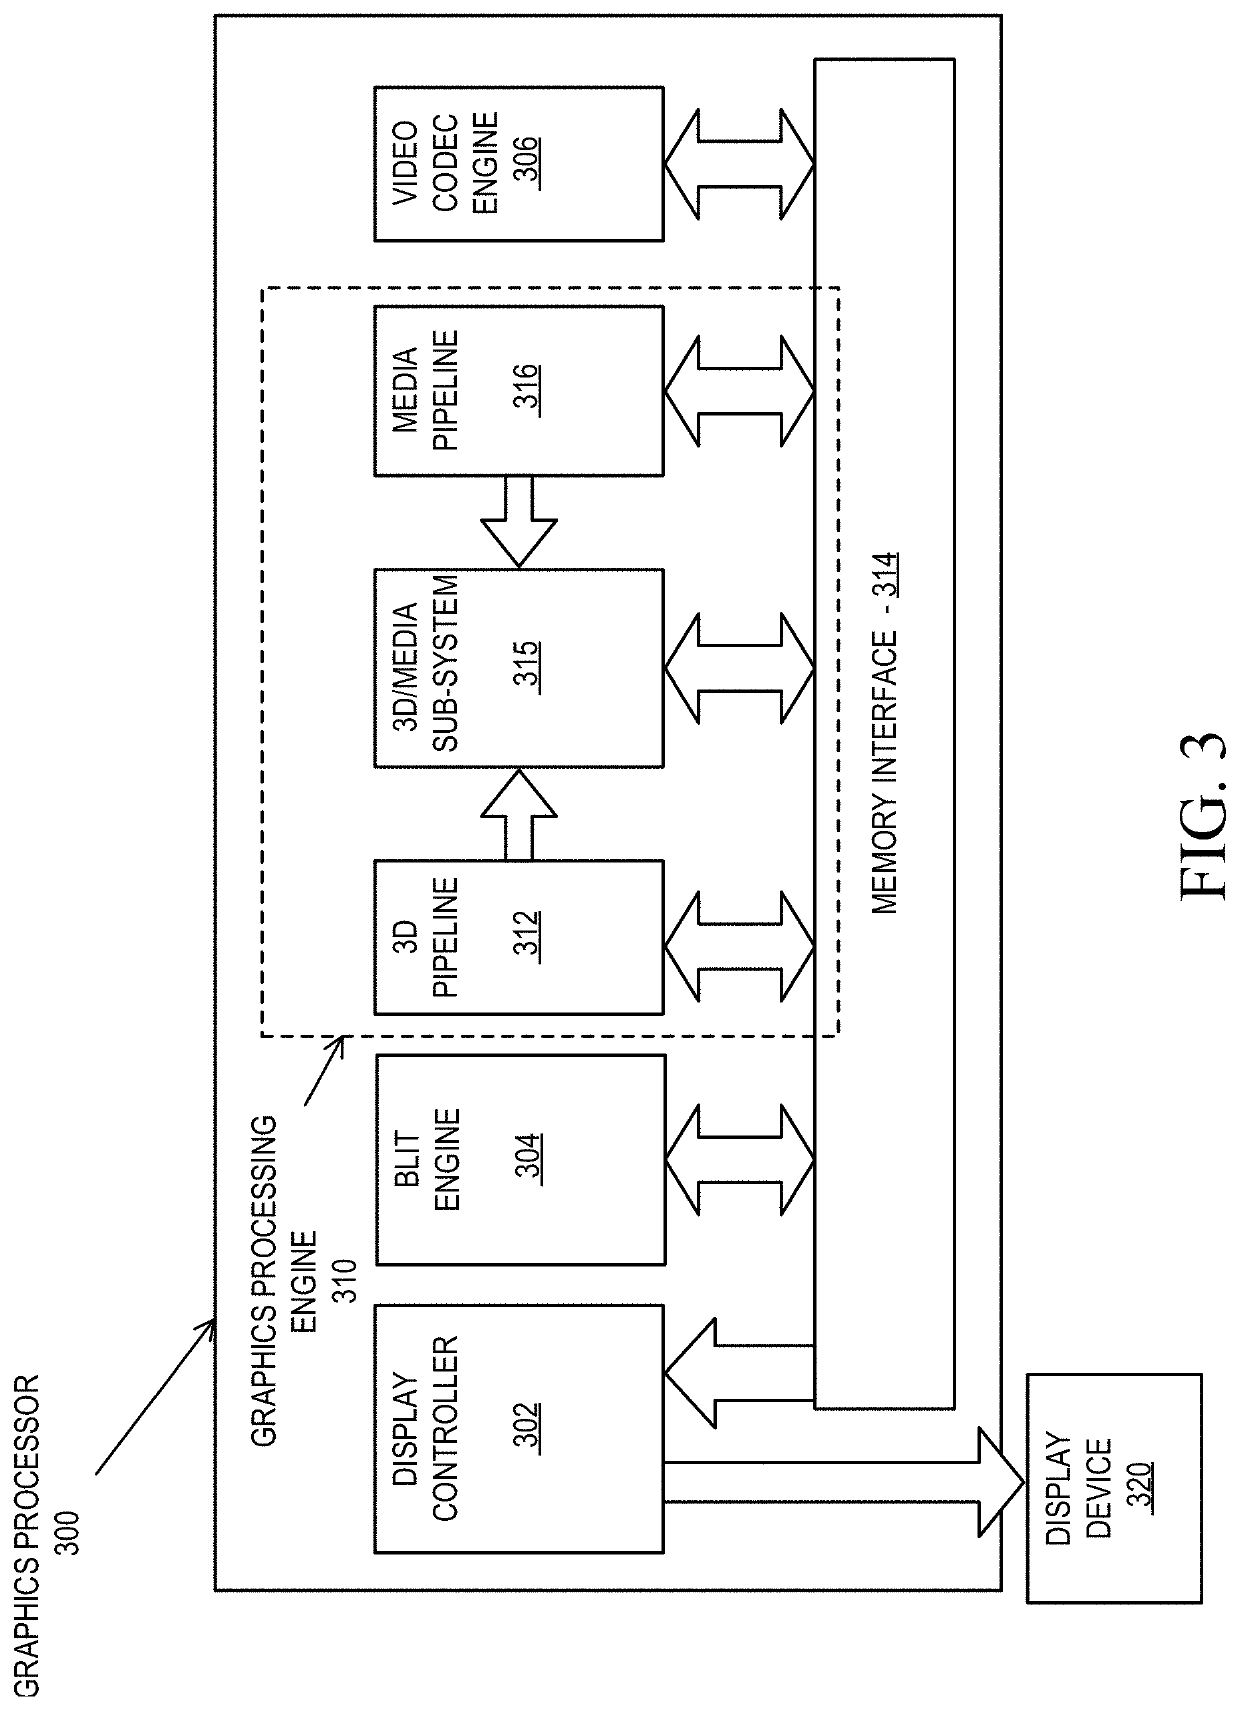 Apparatus and method for ray tracing with grid primitives